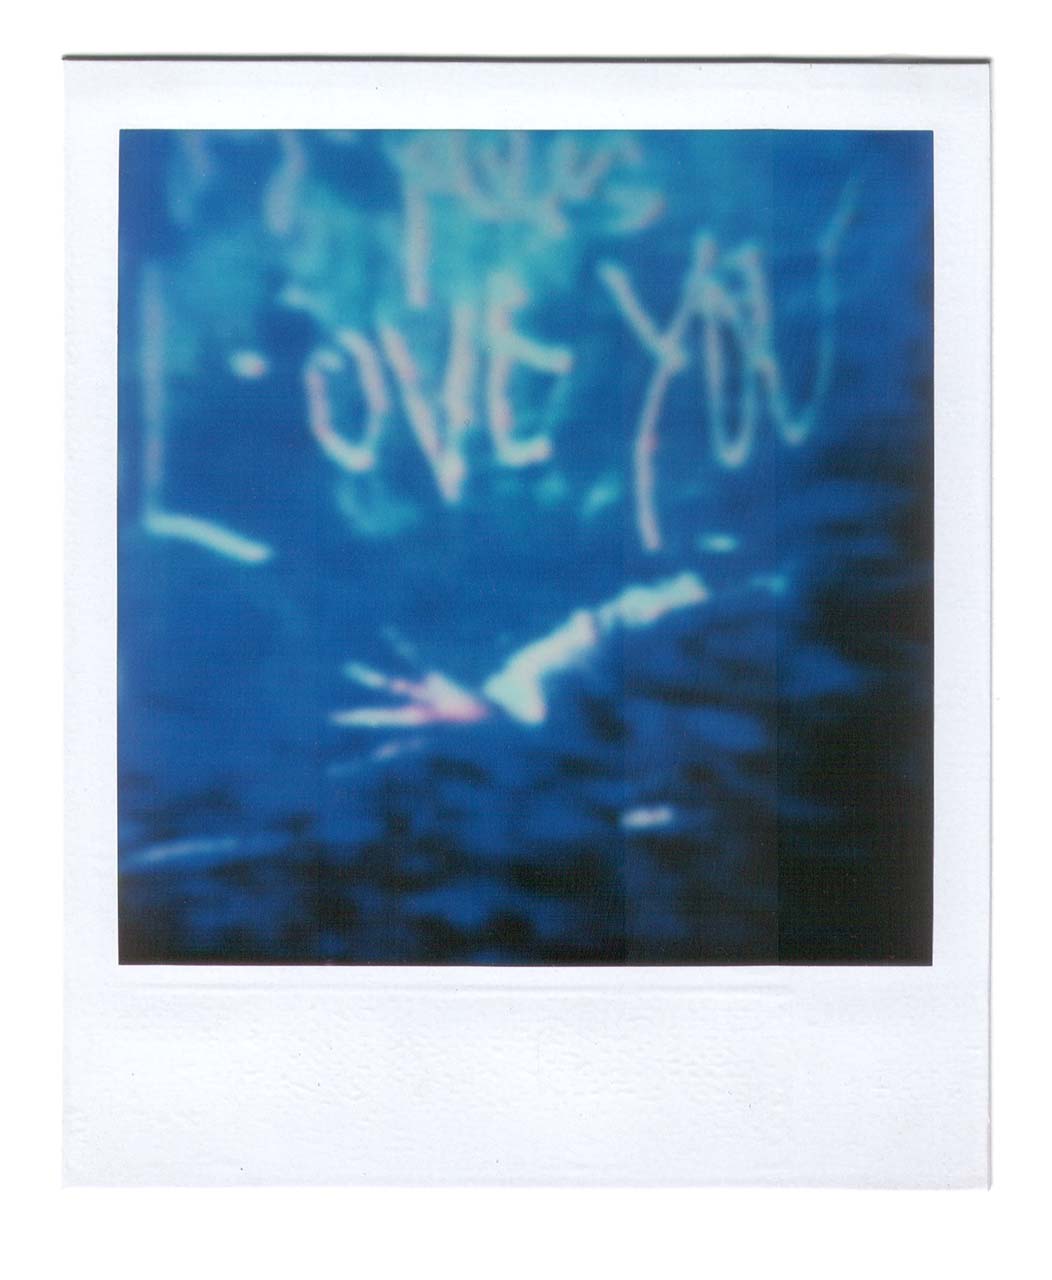 Love you, André Werner, polaroid SX70, 1987